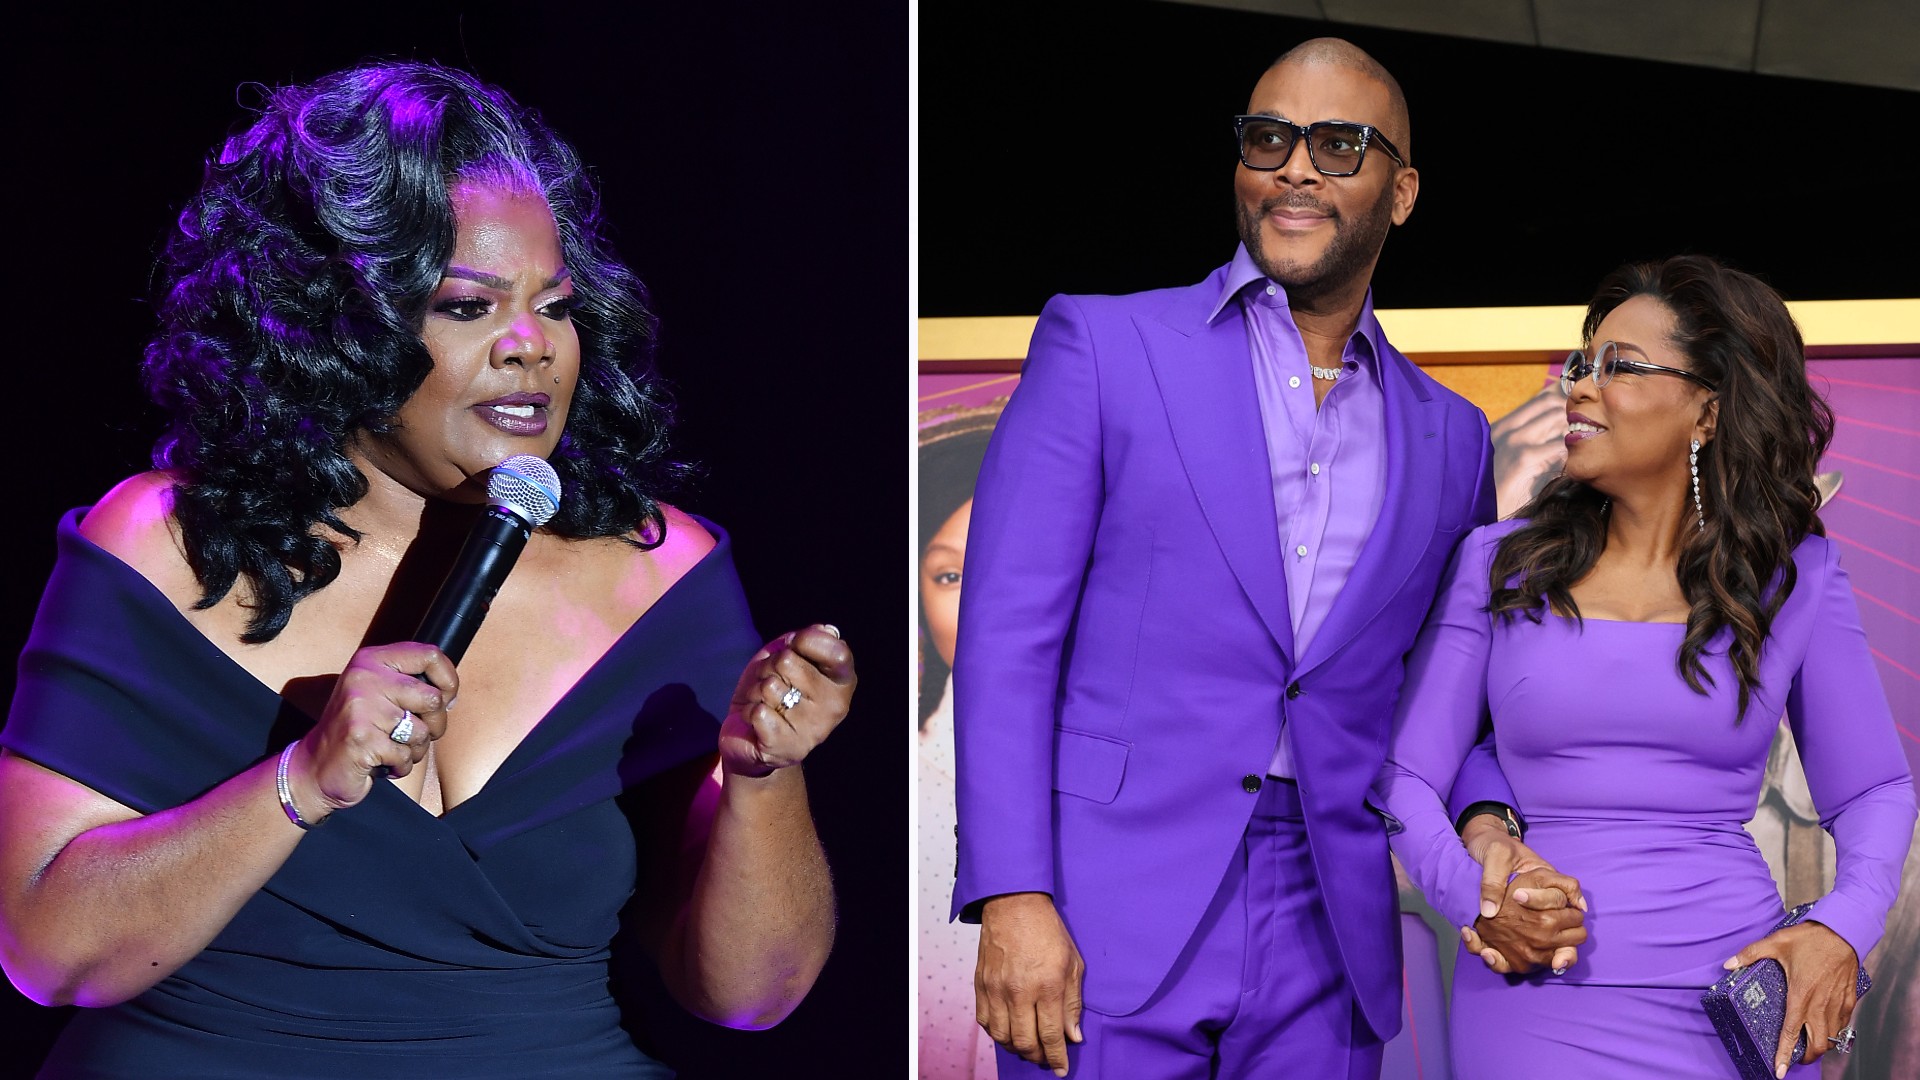 Standing On Business! Mo’Nique Responds To Greg Mathis By Giving Oprah Winfrey & Tyler Perry An “Apology” After Viral Interview thumbnail